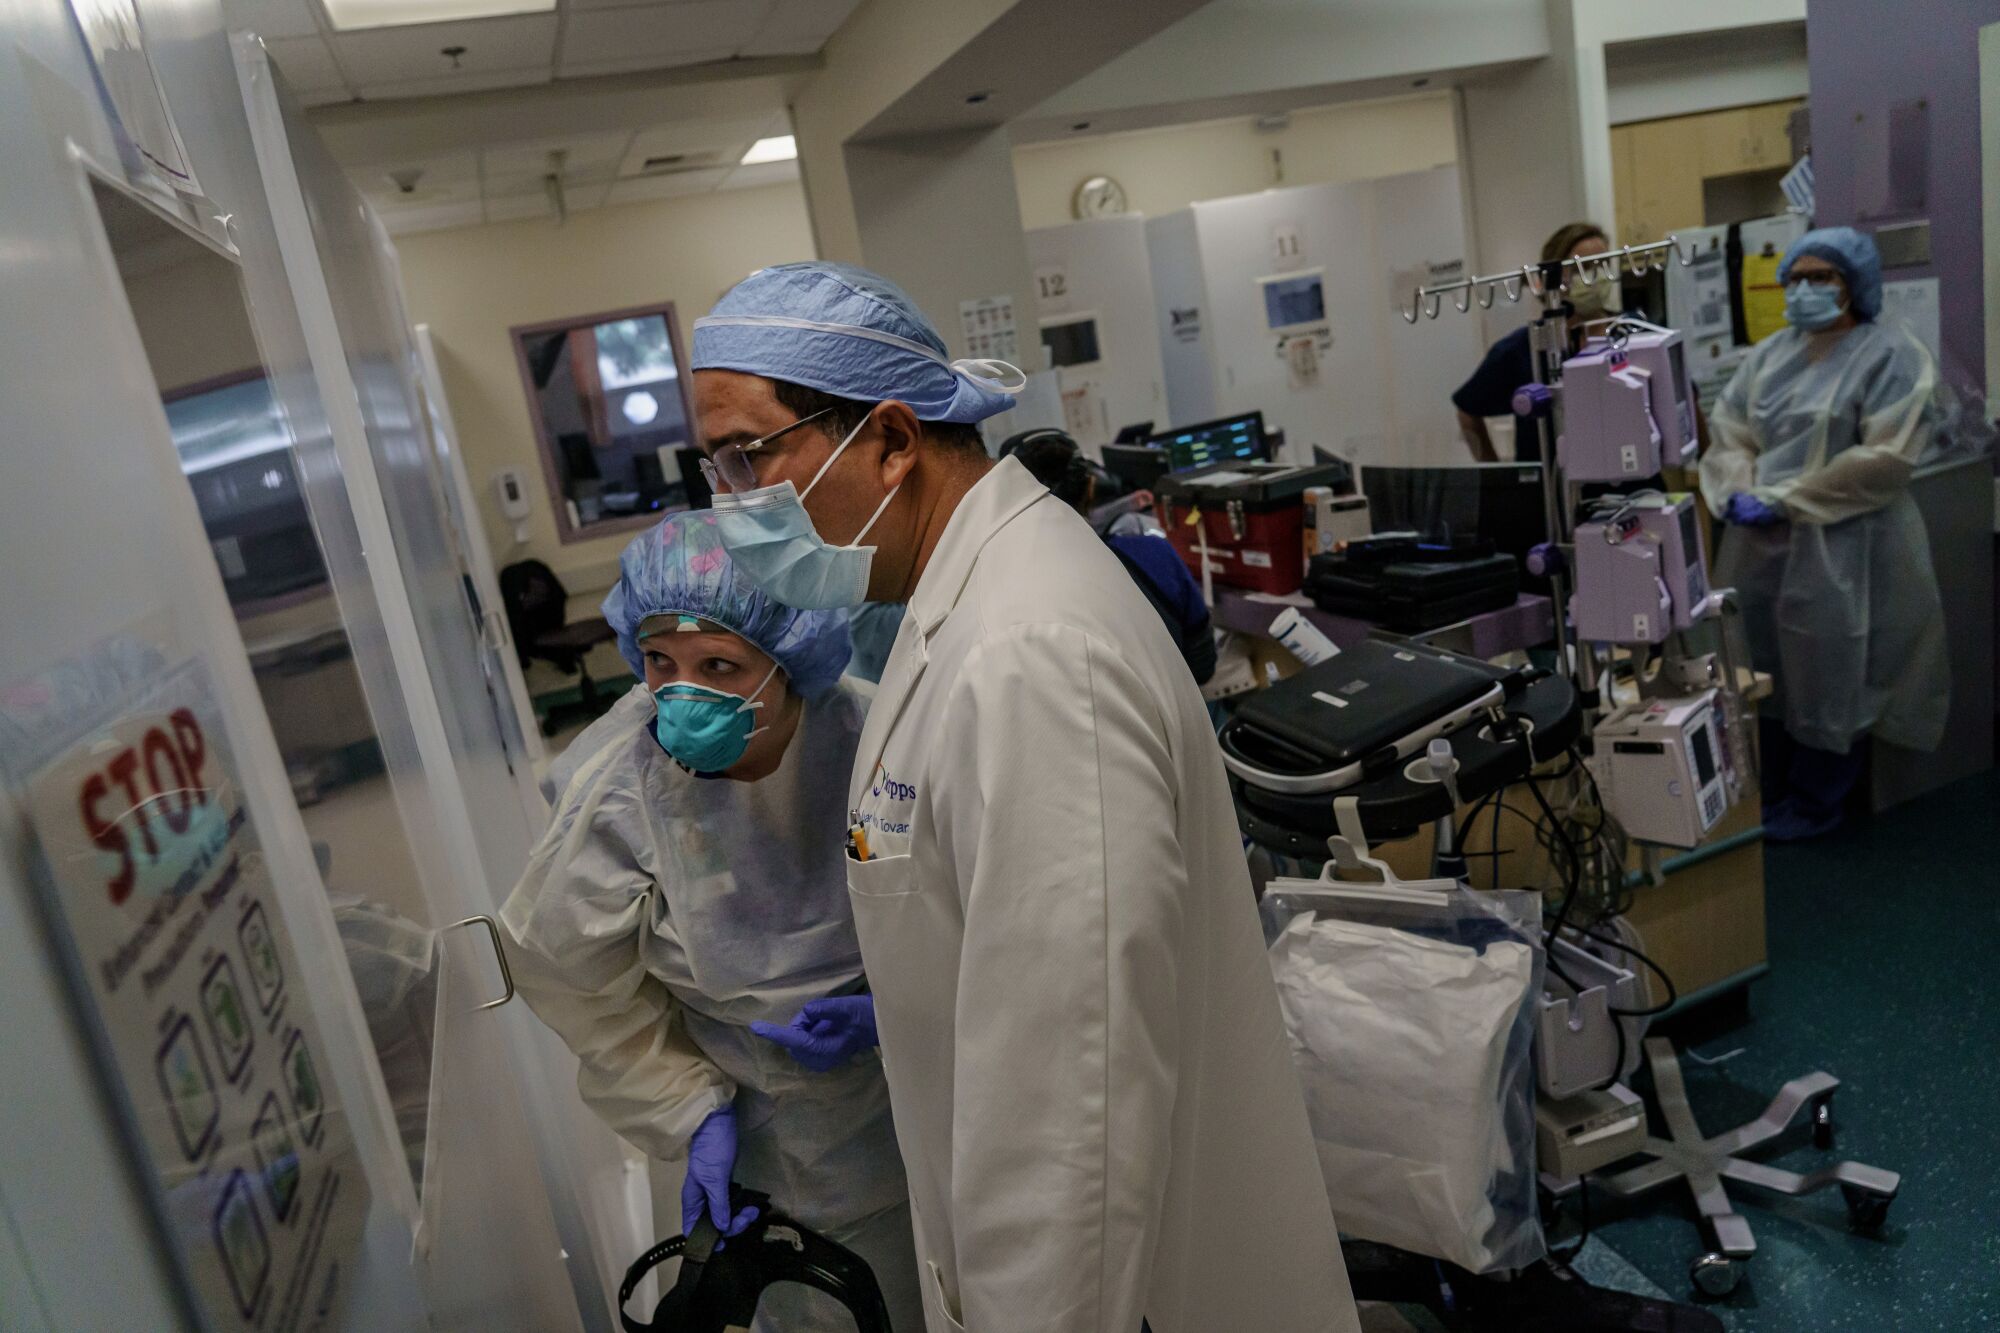 Doctor Juan Tovar, along with Nurse Practitioner Charlotte Thomas watch as an intubation is performed on a patient with COVID-19 symptoms, at the ICU at Scripps Mercy Hospital in Chula Vista, Calif., on April 23, 2020.